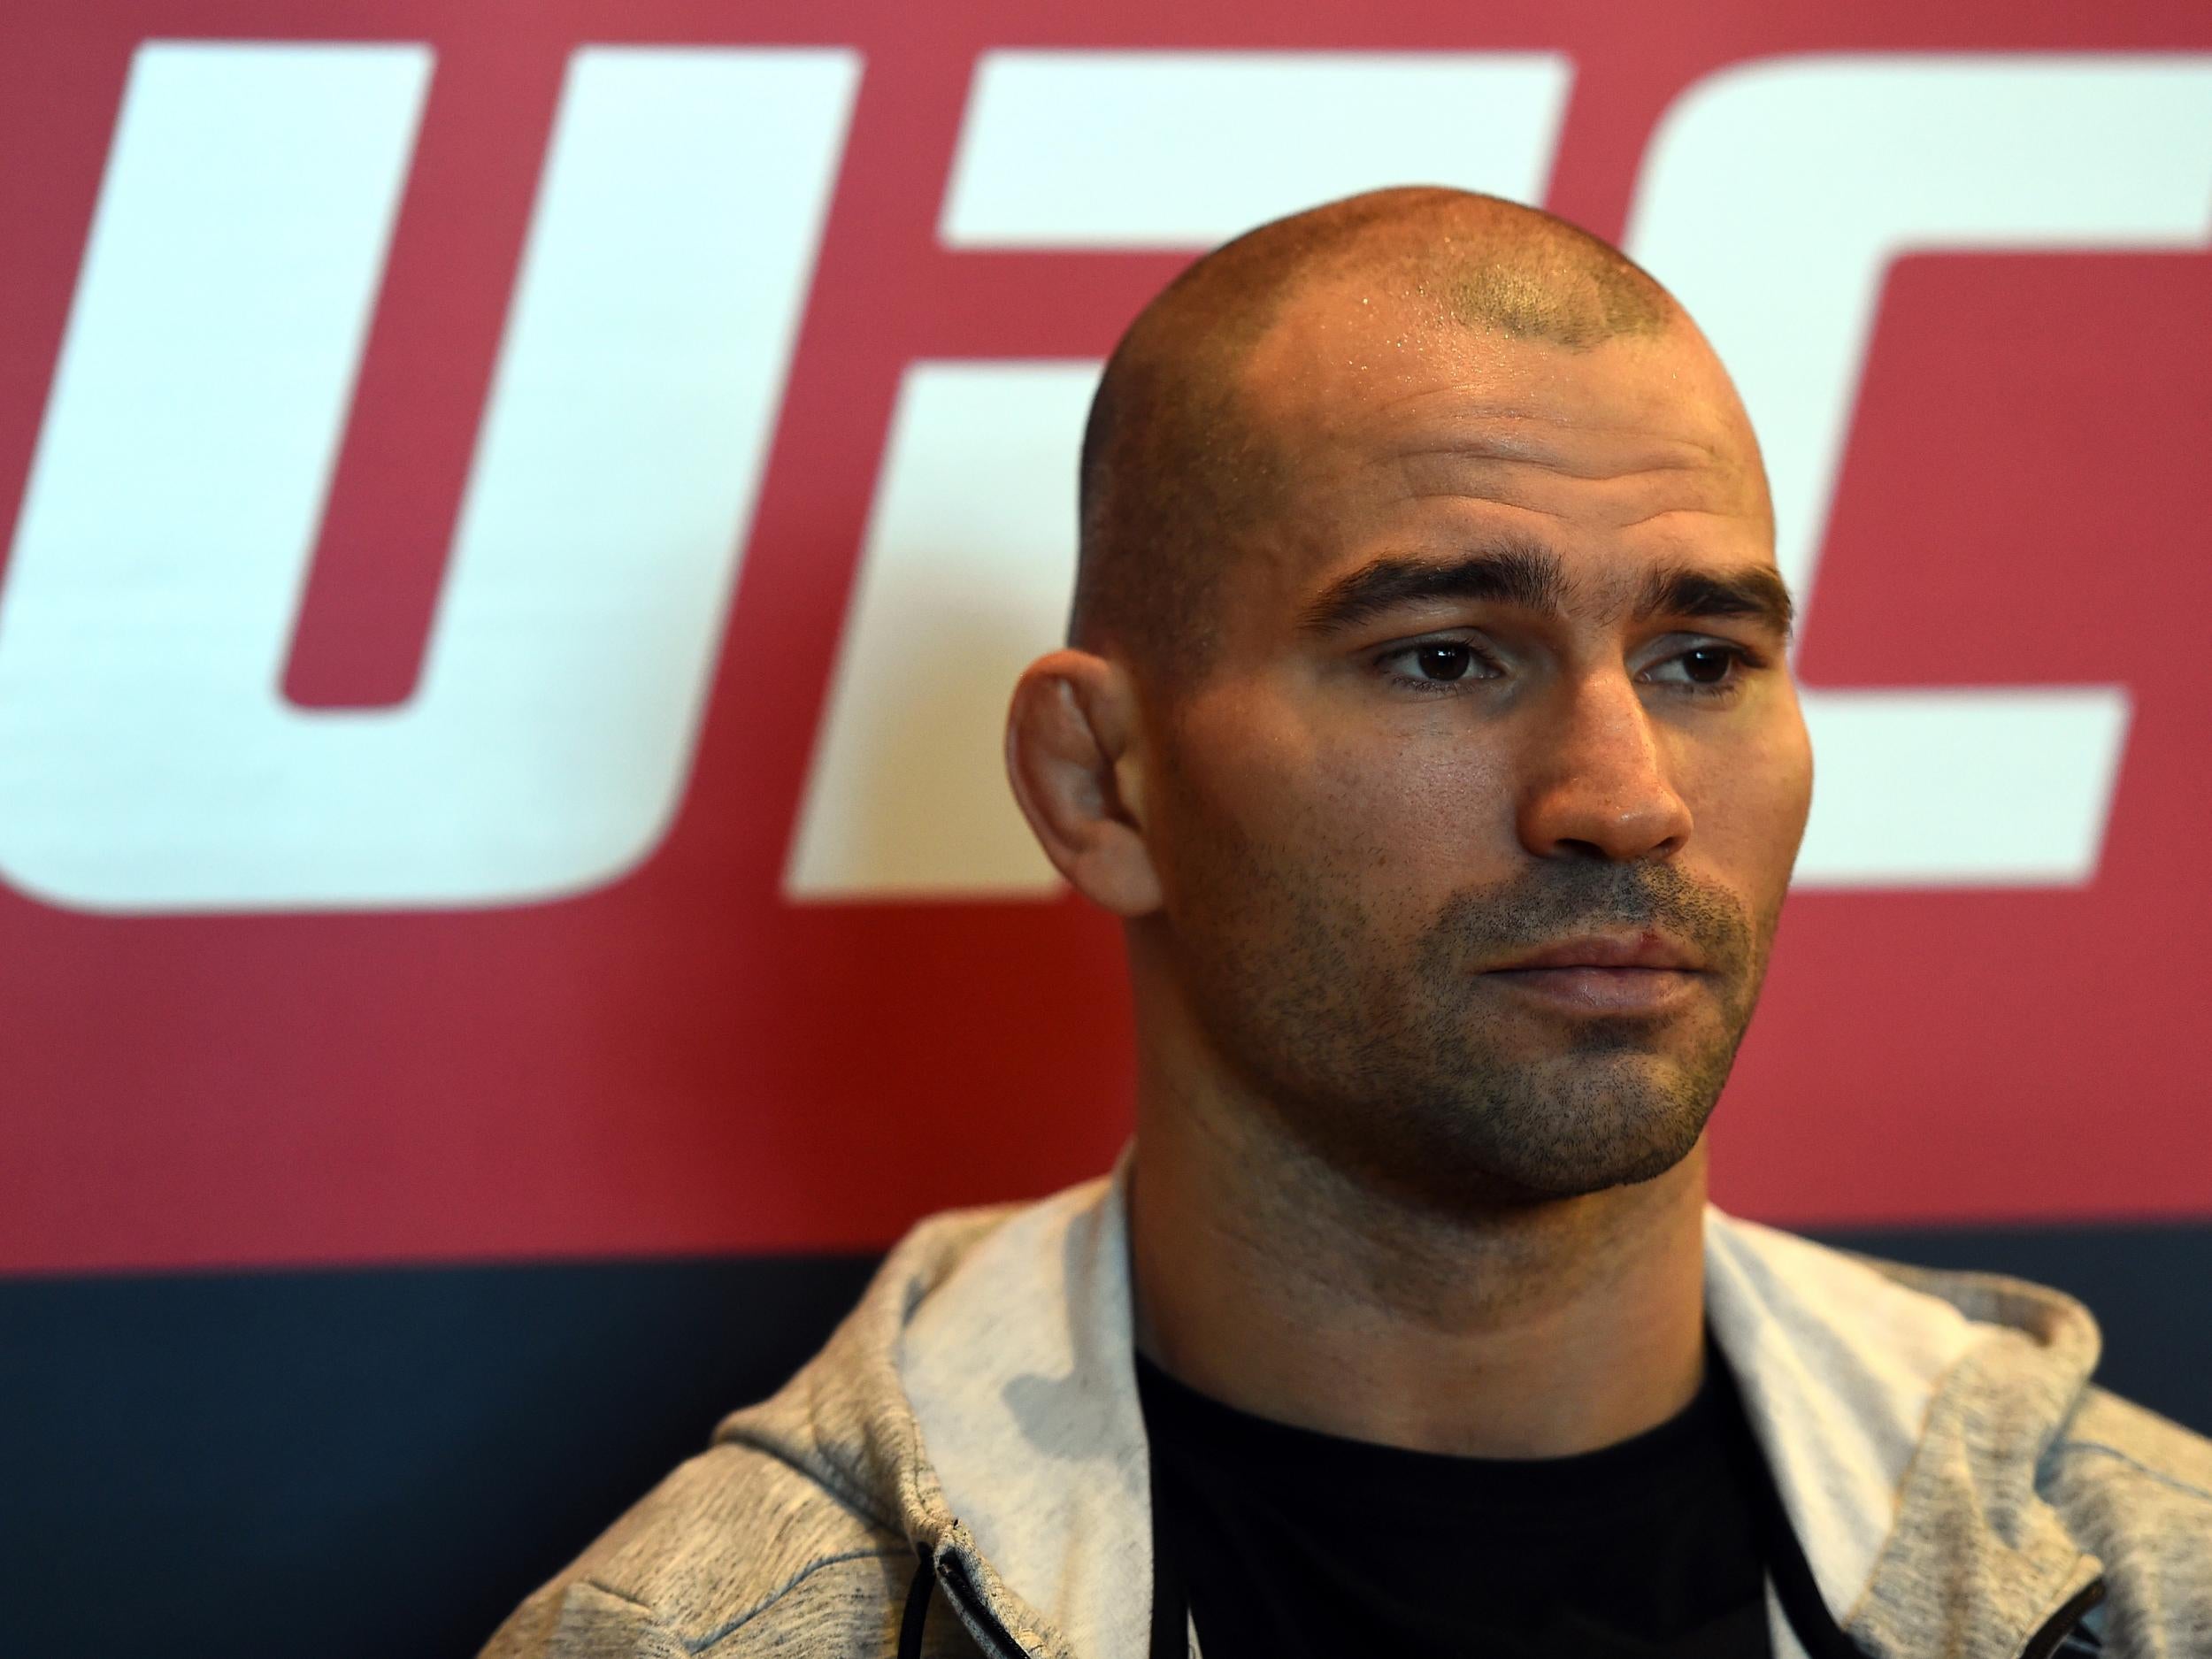 Lobov will be hoping to spring one of the biggest upsets in recent memory against Swanson